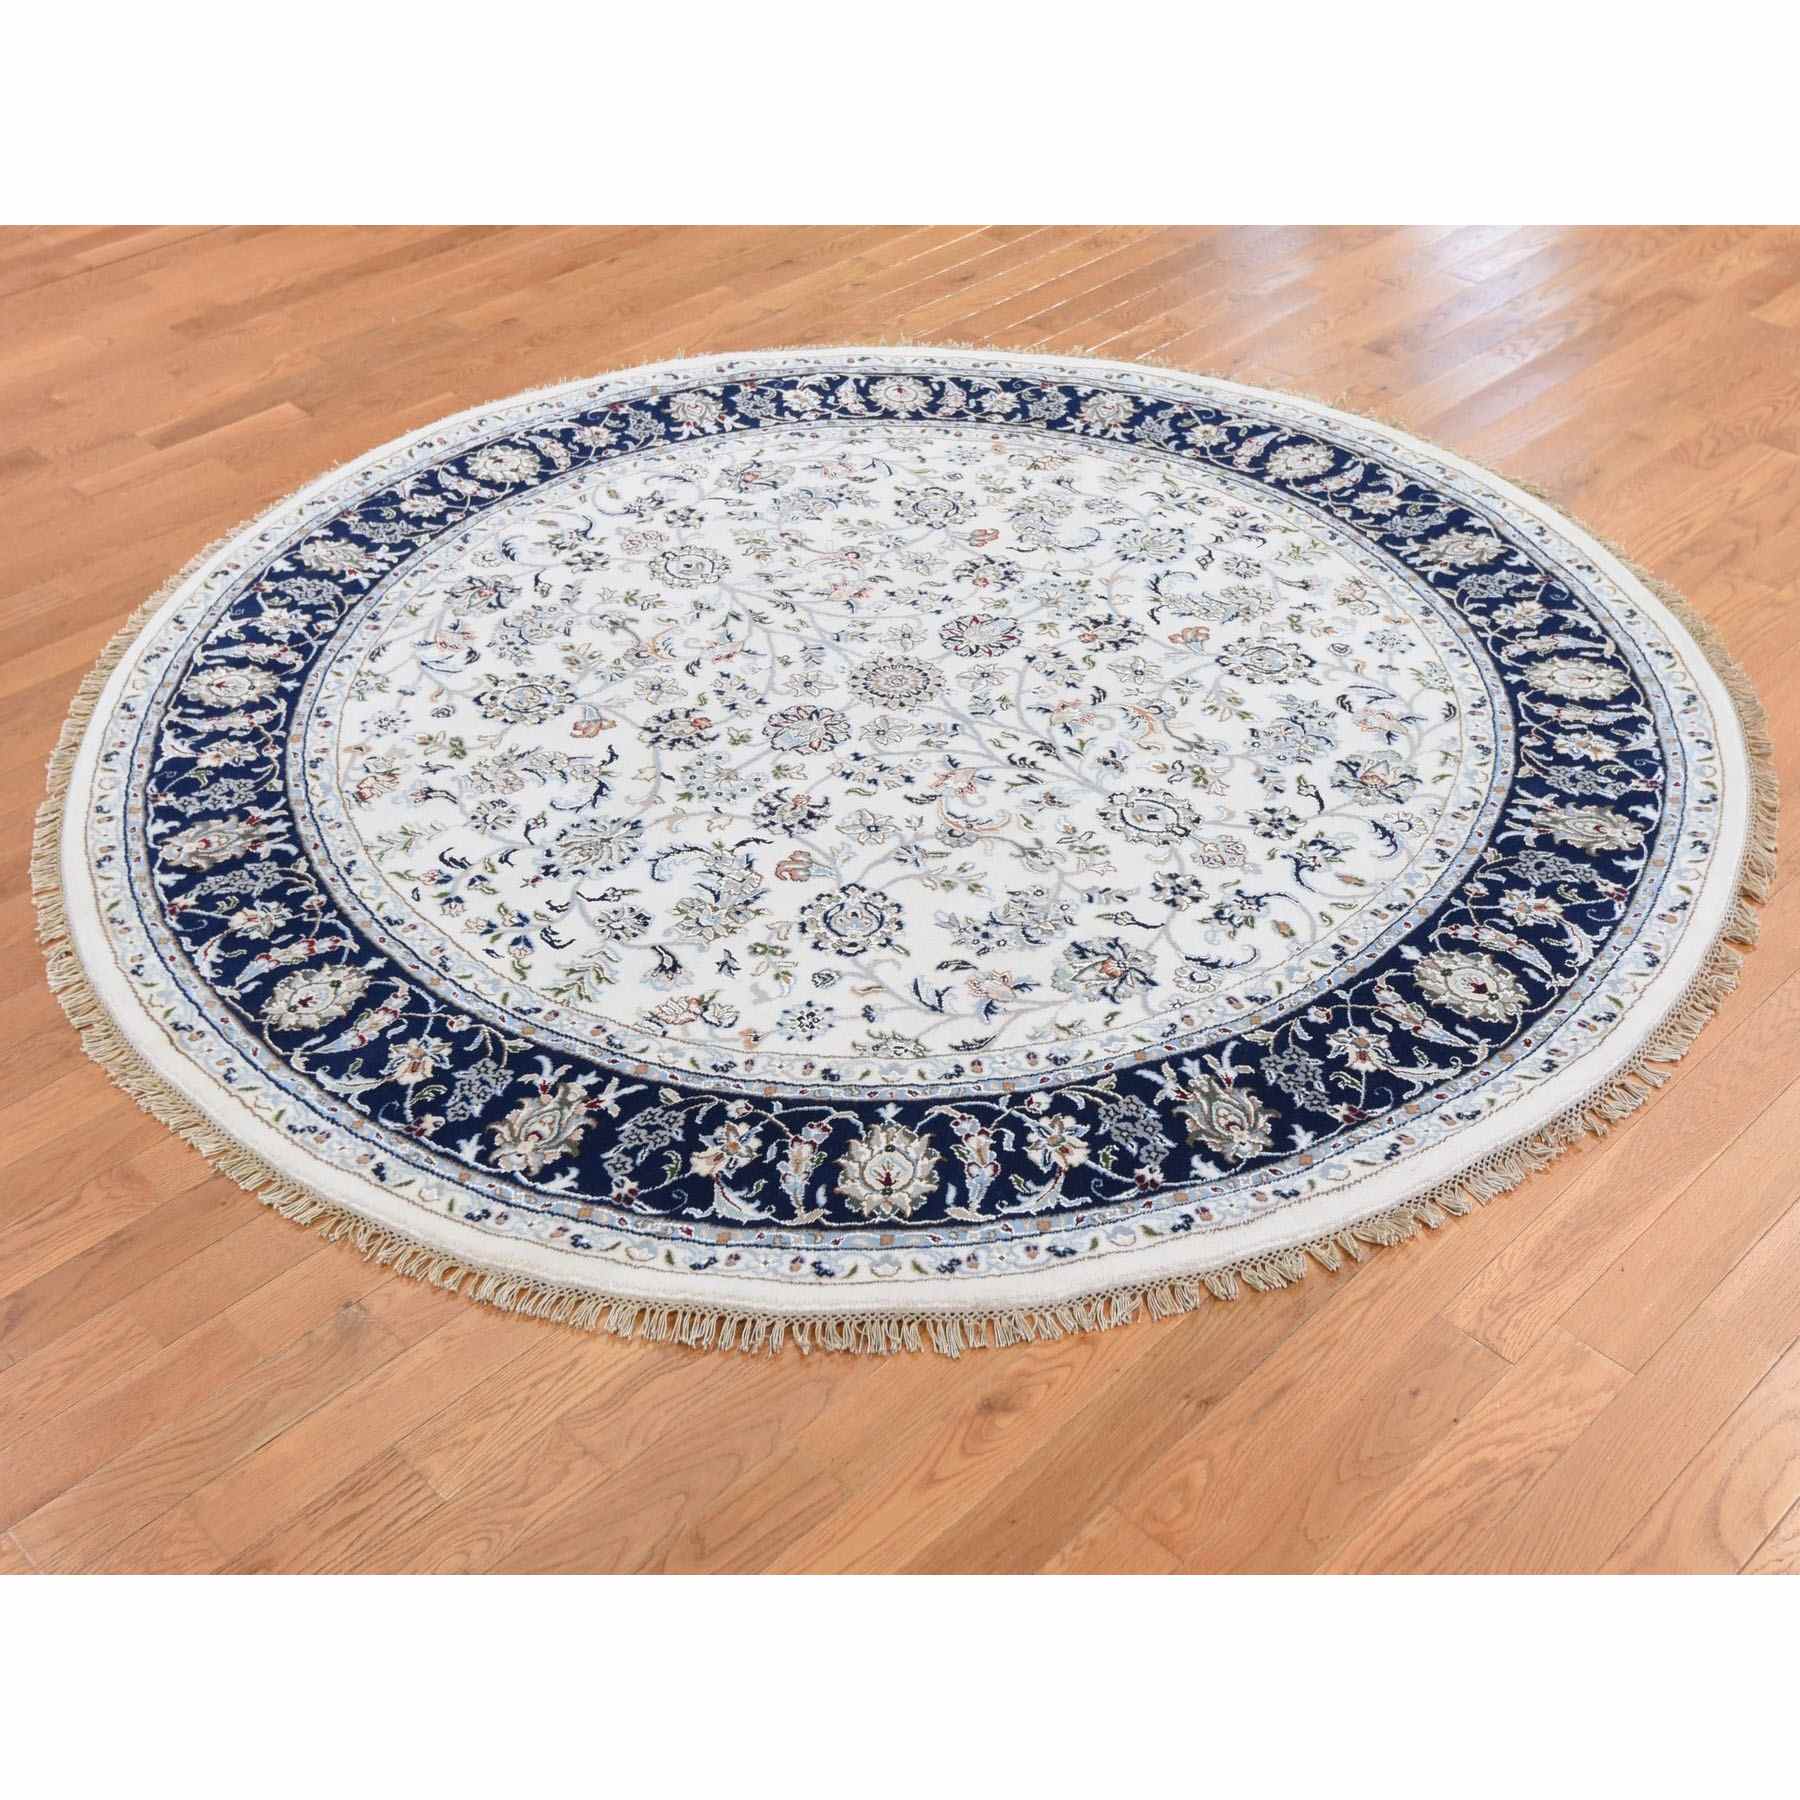 Fine-Oriental-Hand-Knotted-Rug-249965